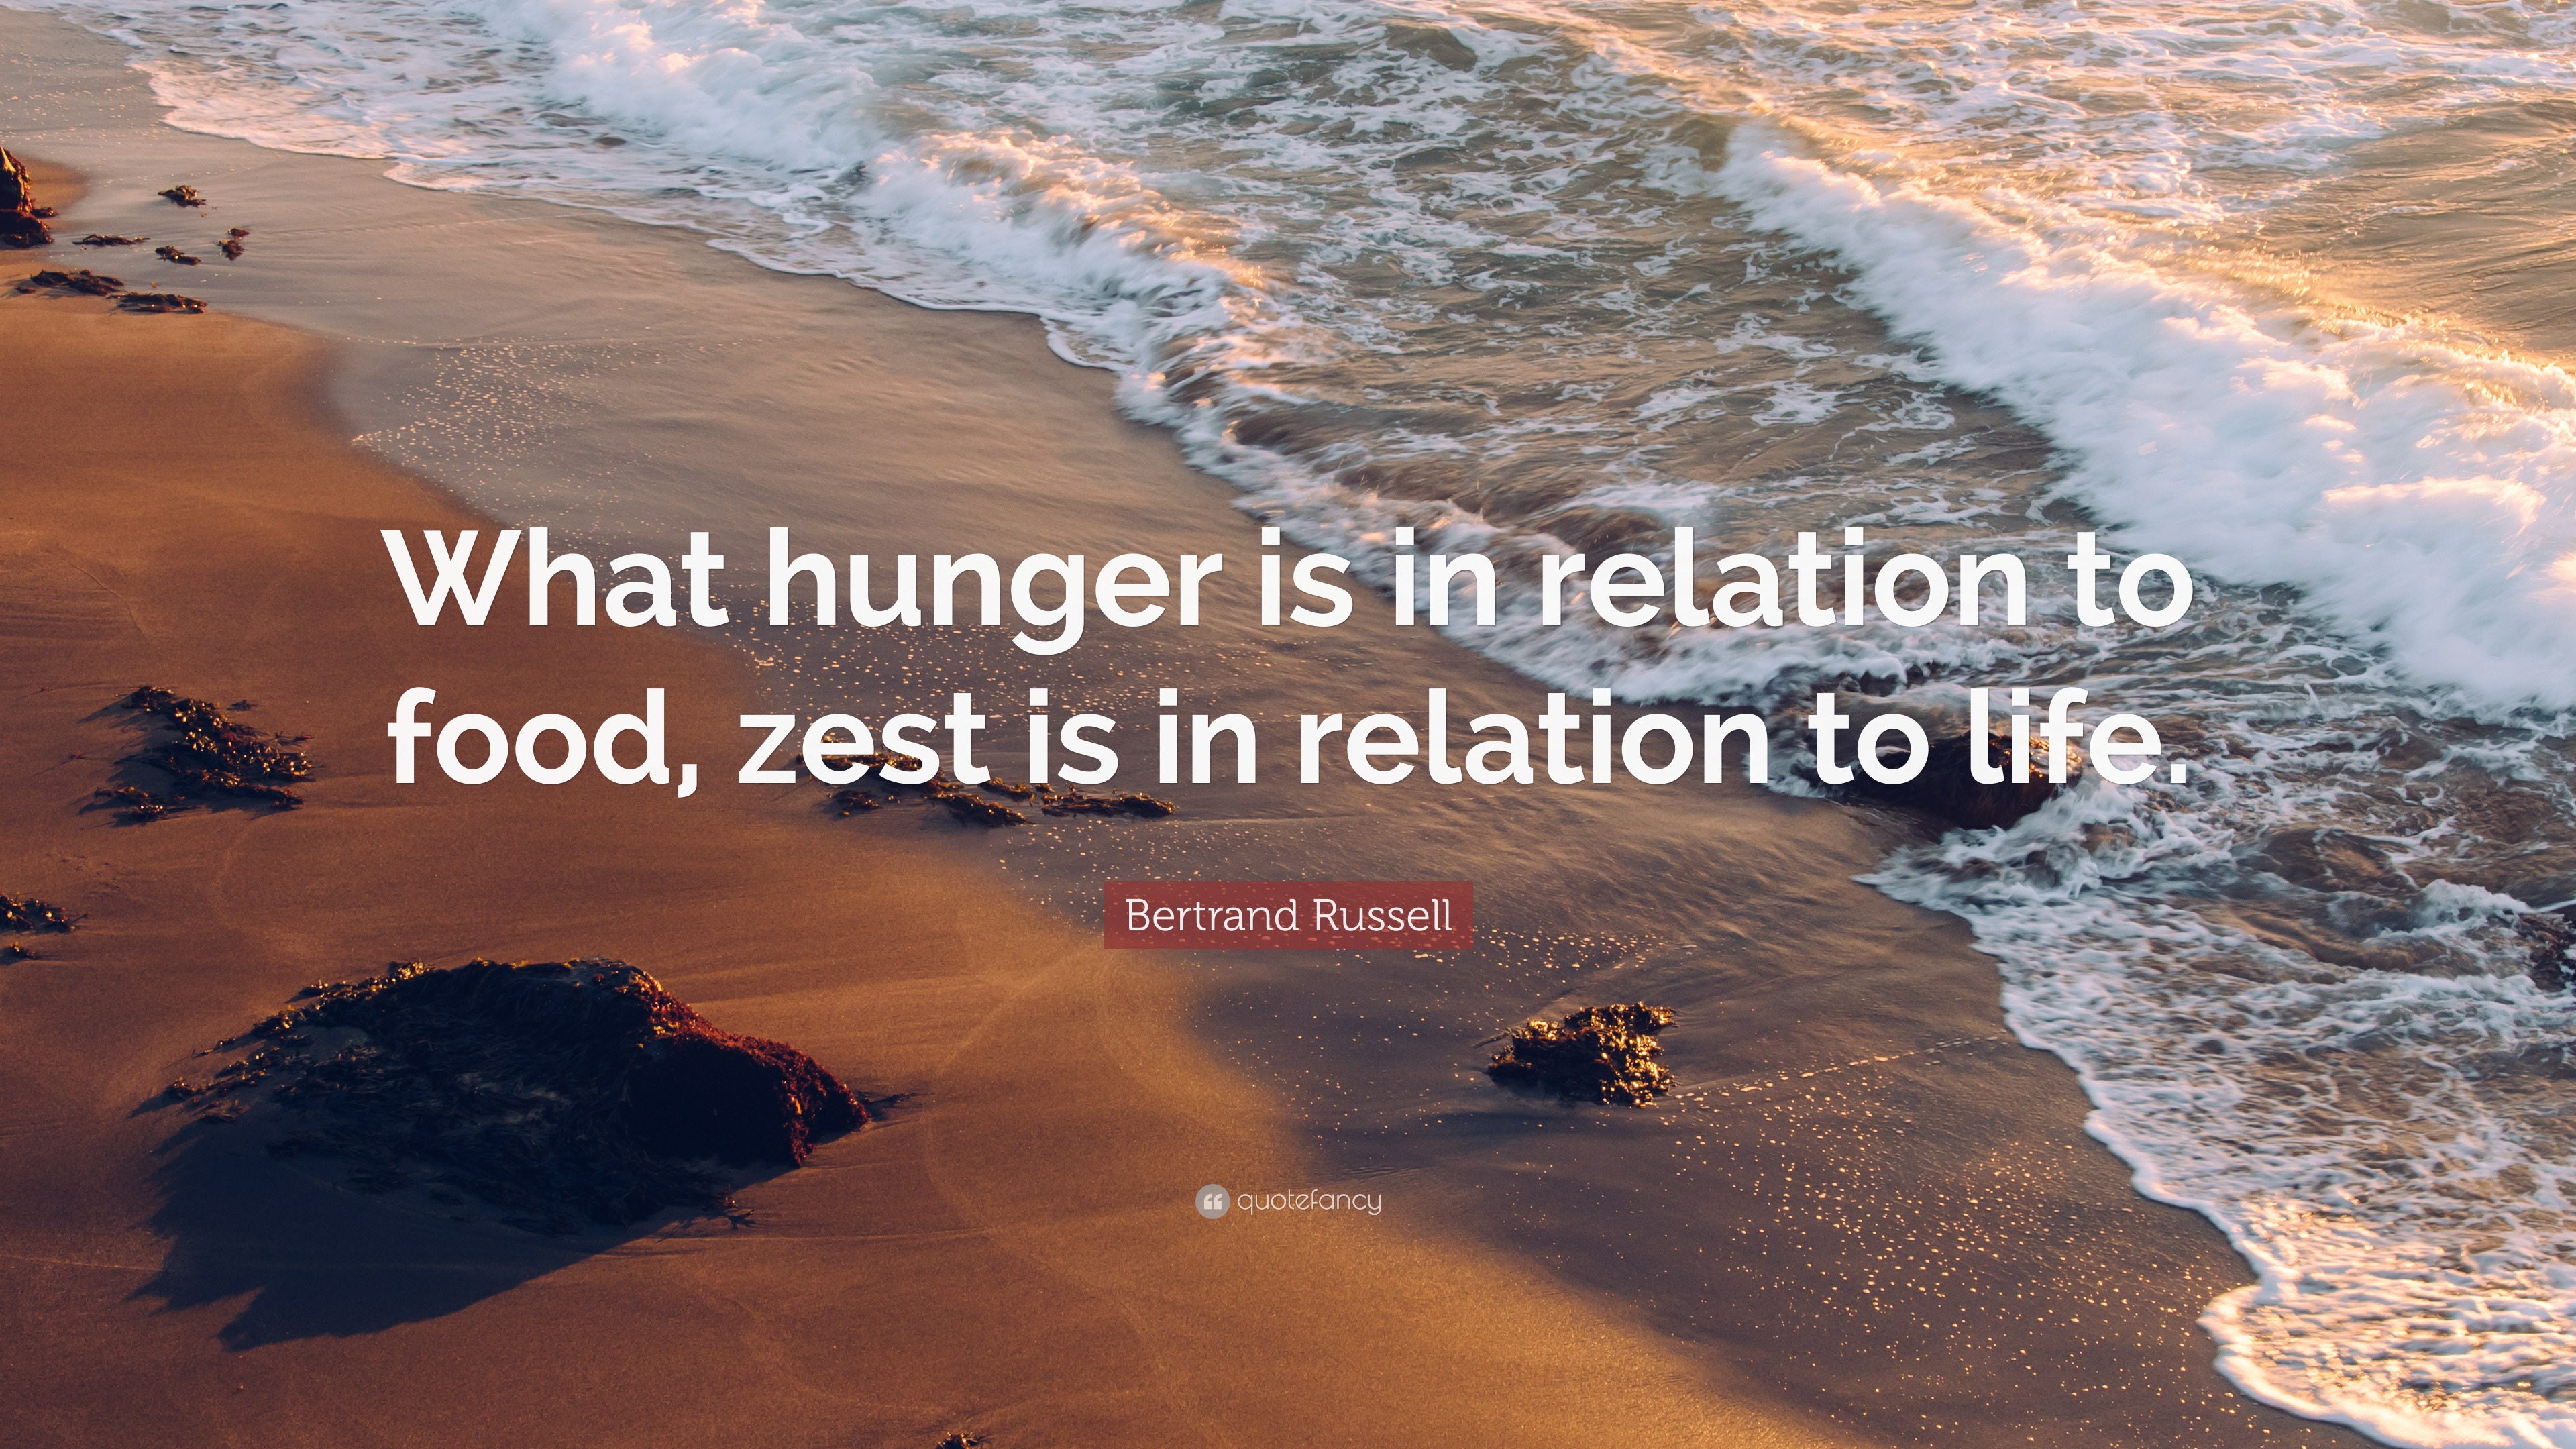 Bertrand Russell Quote What Hunger Is In Relation To Food Zest Is In Relation To Life